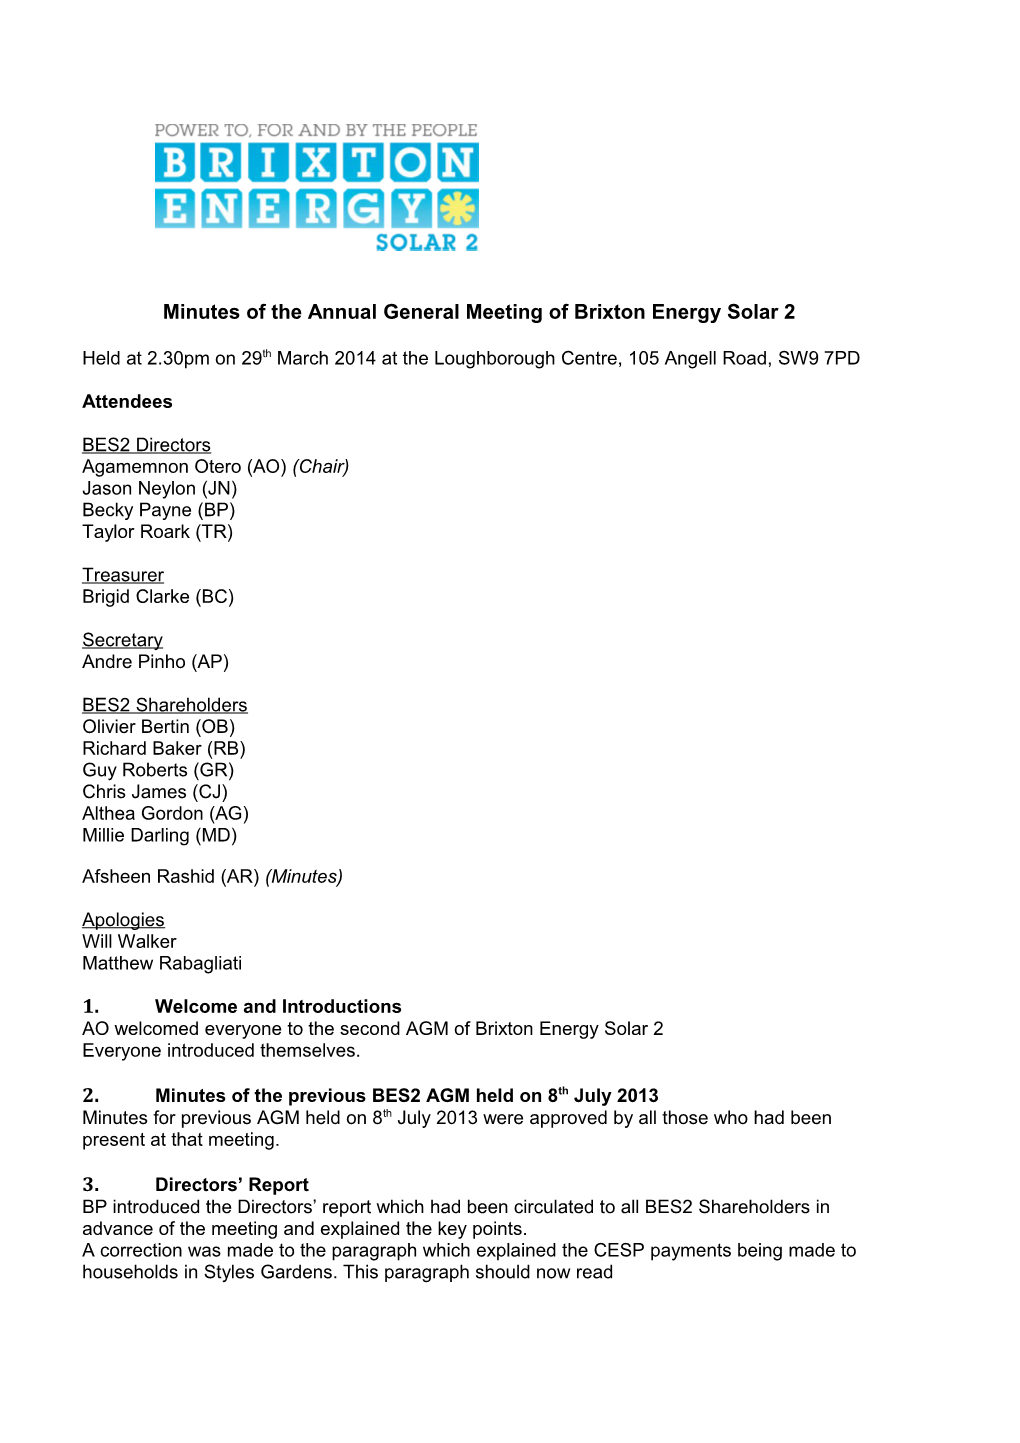 Minutes of the Annual General Meeting of Brixton Energy Solar 2